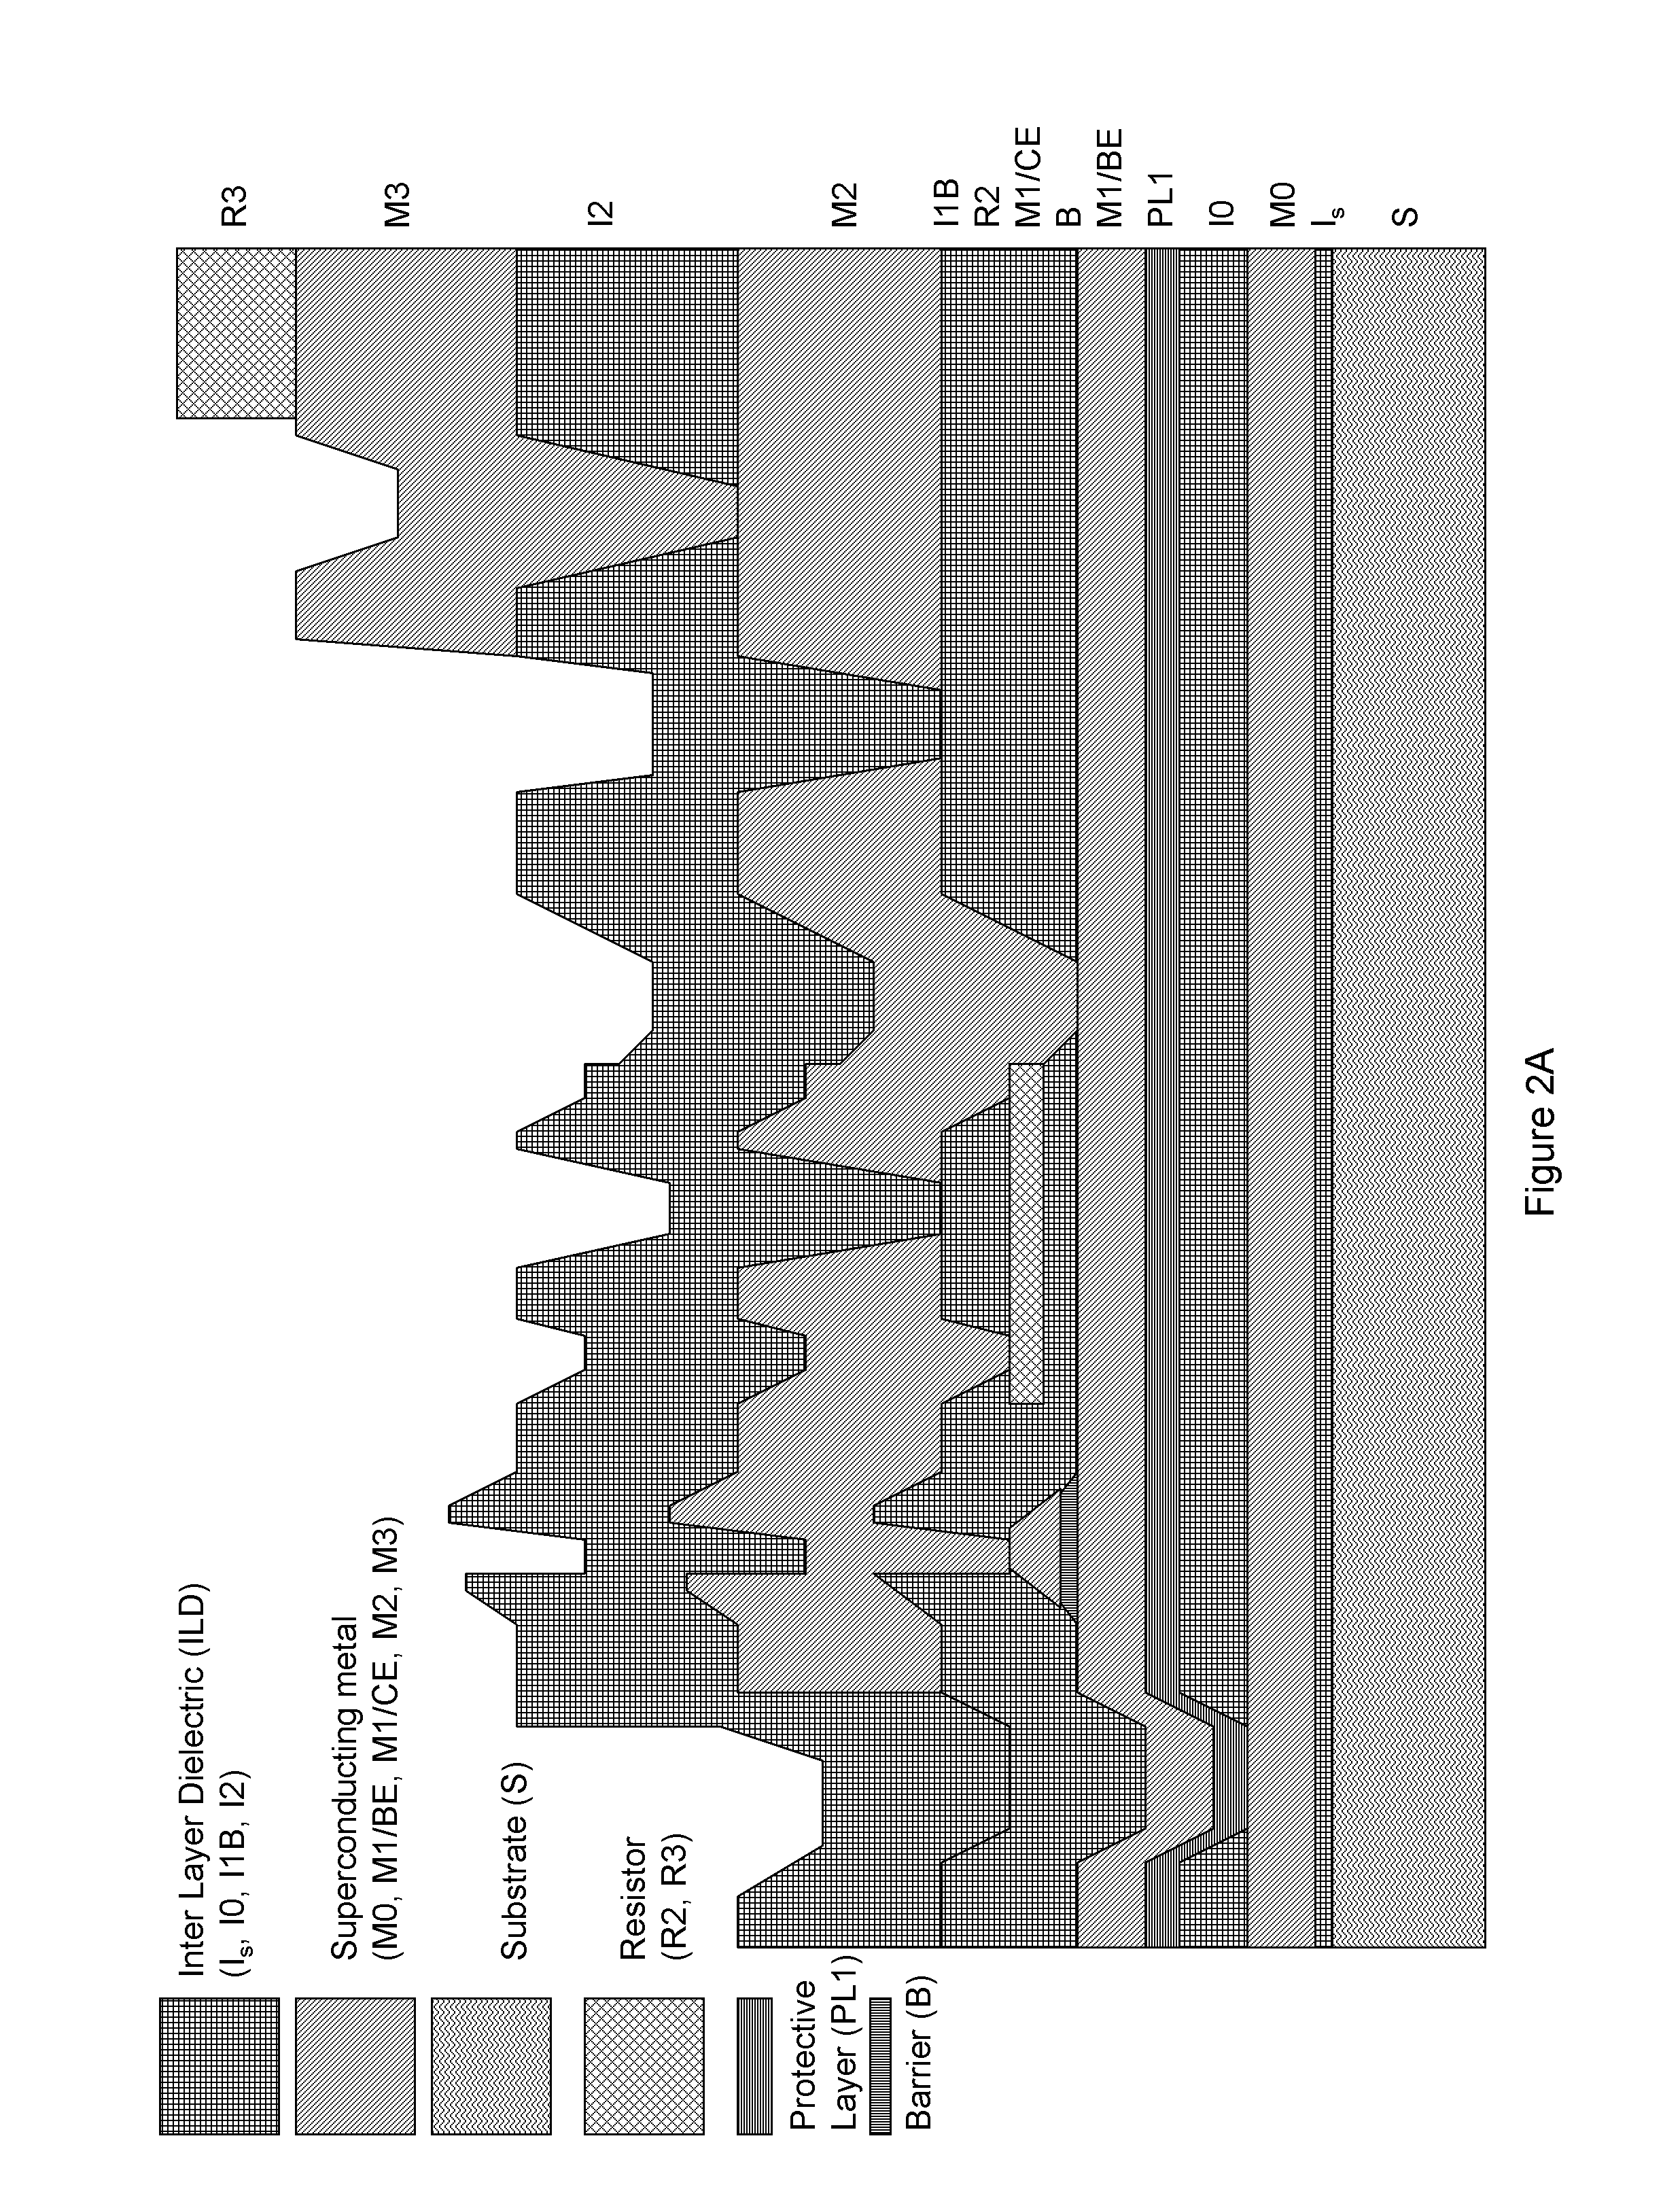 System and method for providing multi-conductive layer metallic interconnects for superconducting integrated circuits